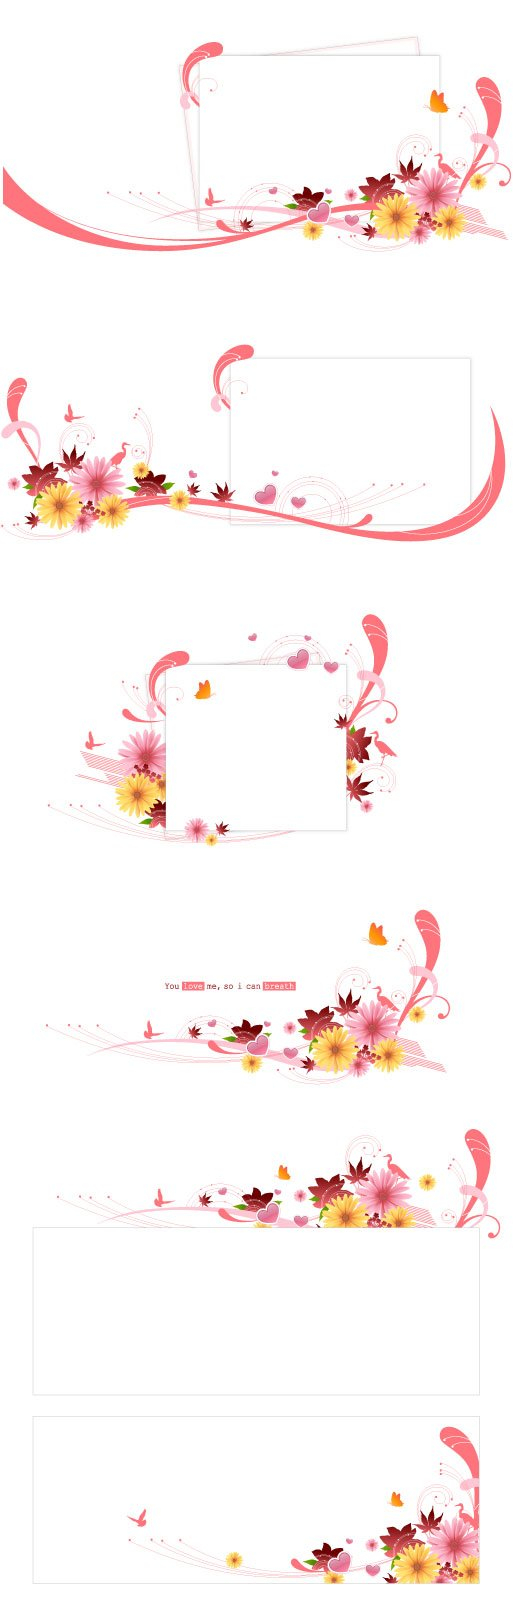 floral,background,layout,com365psd